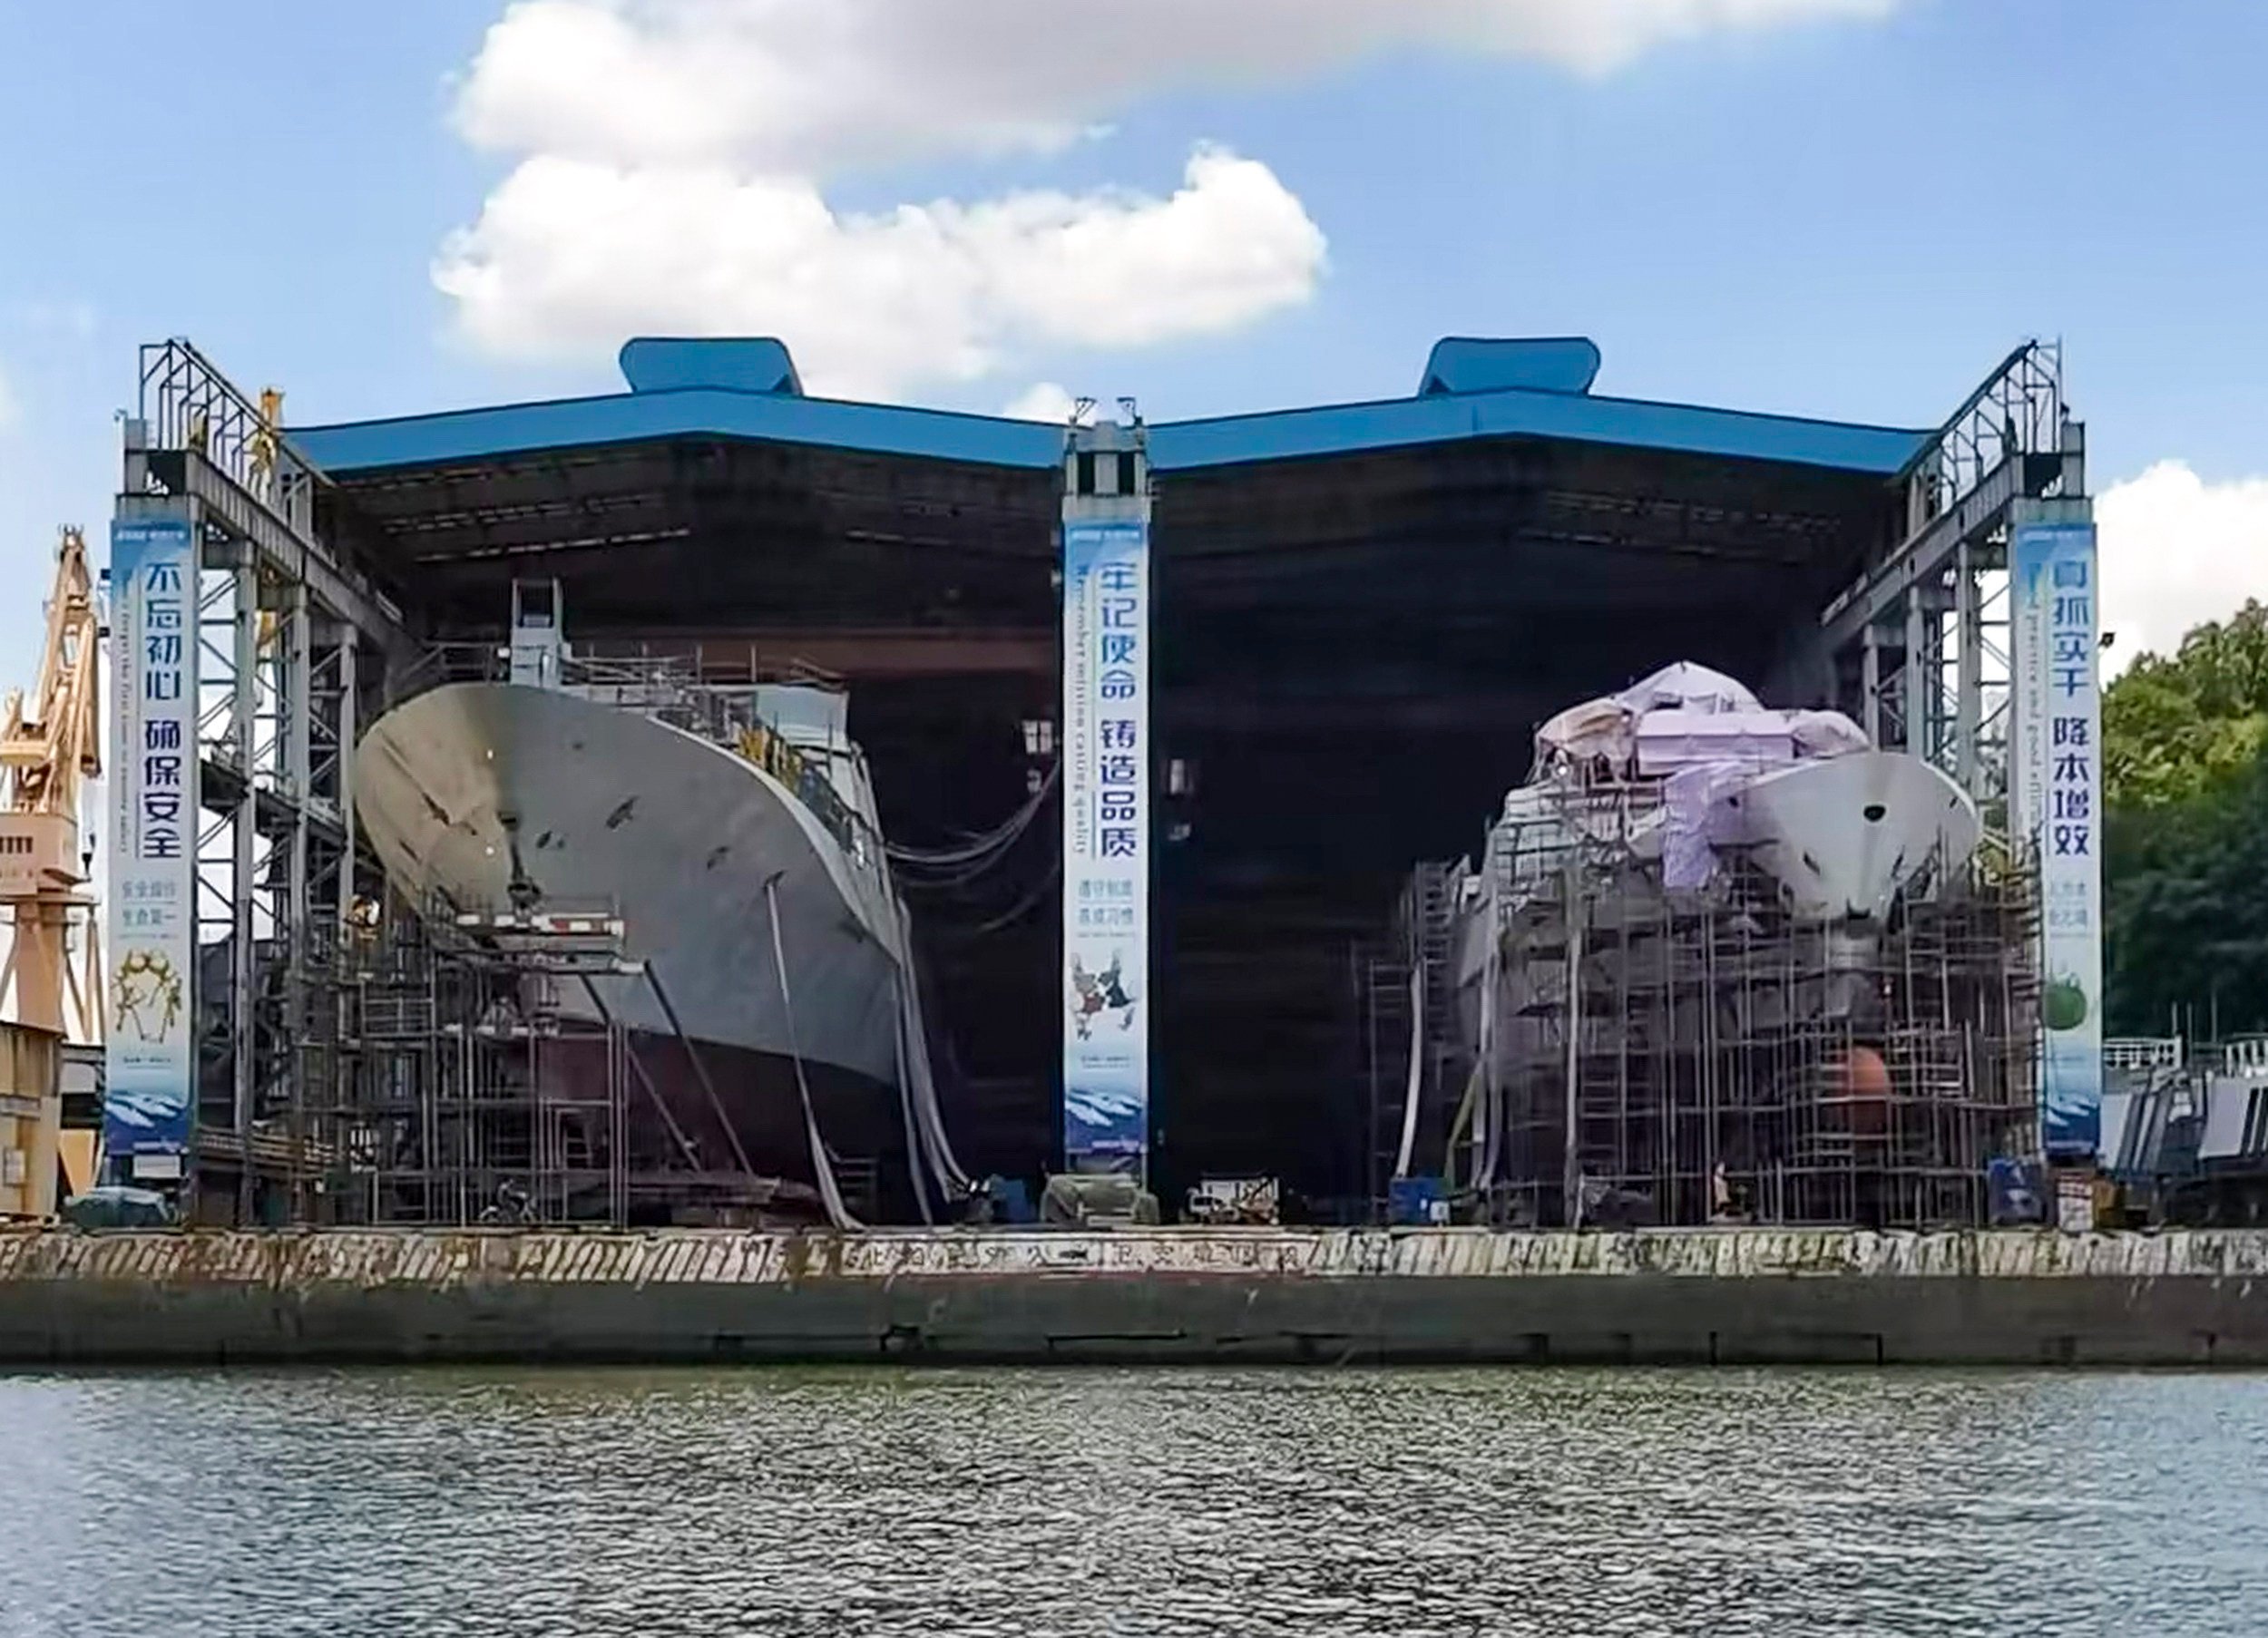 China is expected to launch its Type 054B frigate, shown here on the left next to its predecessor, by the end of the year. Photo: Weibo